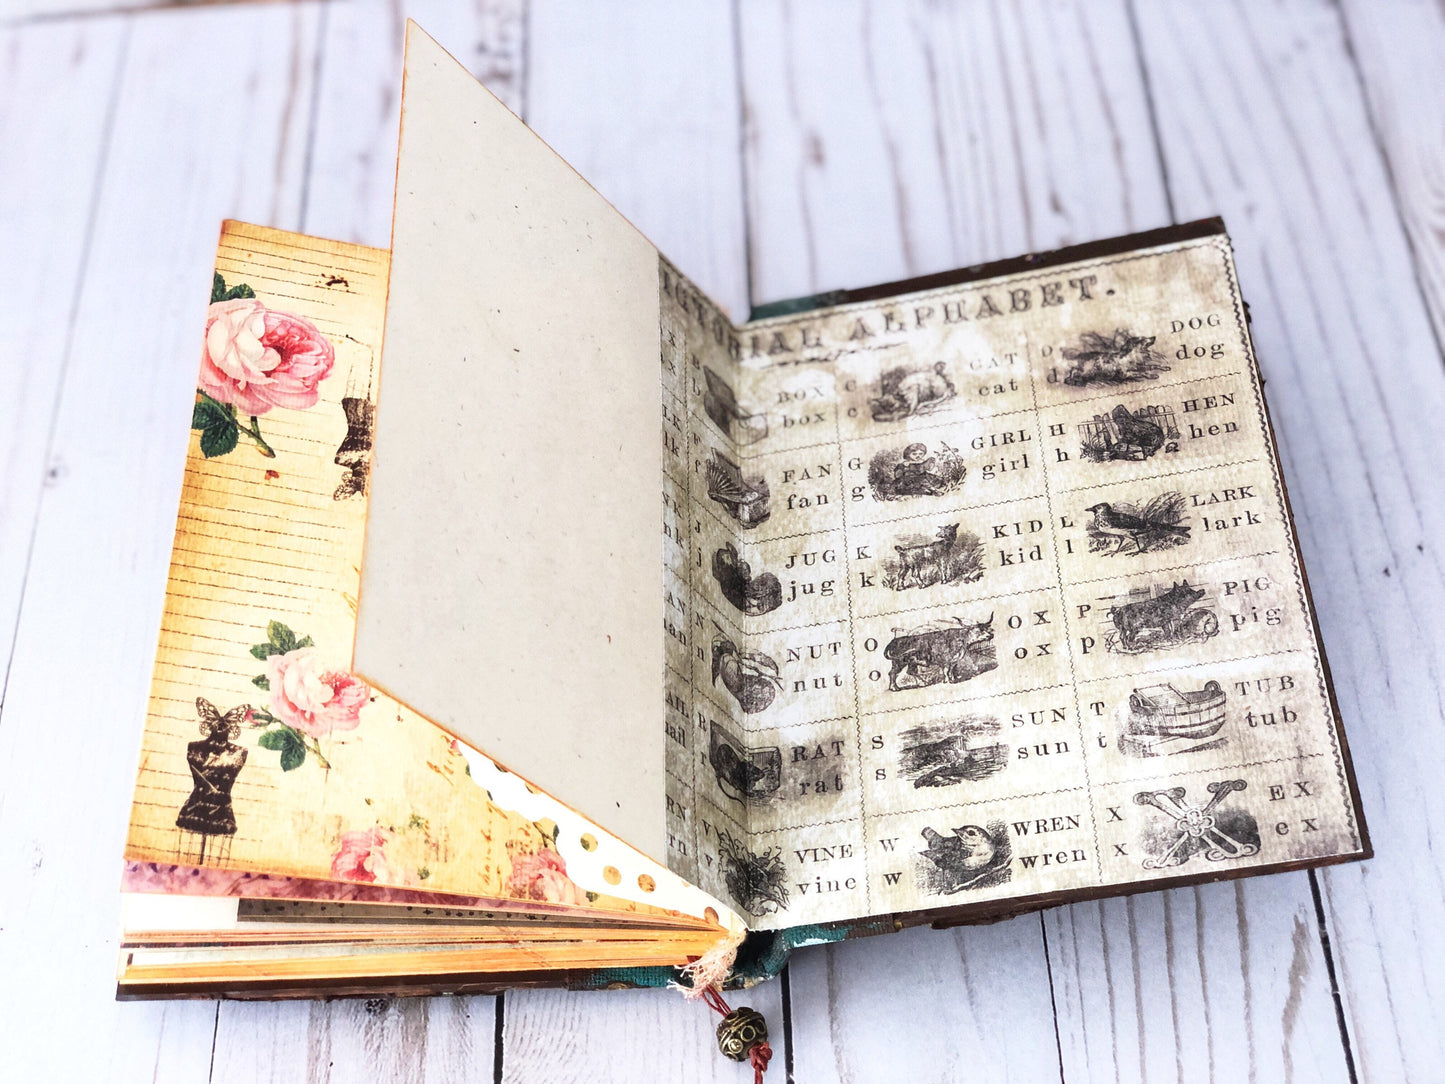 Journal Diary Book Scrapbook, Wedding Guestbook, Steampunk Notebook Gift, OOAK Memory Keeping Journal with decorated pages, Art Journal book